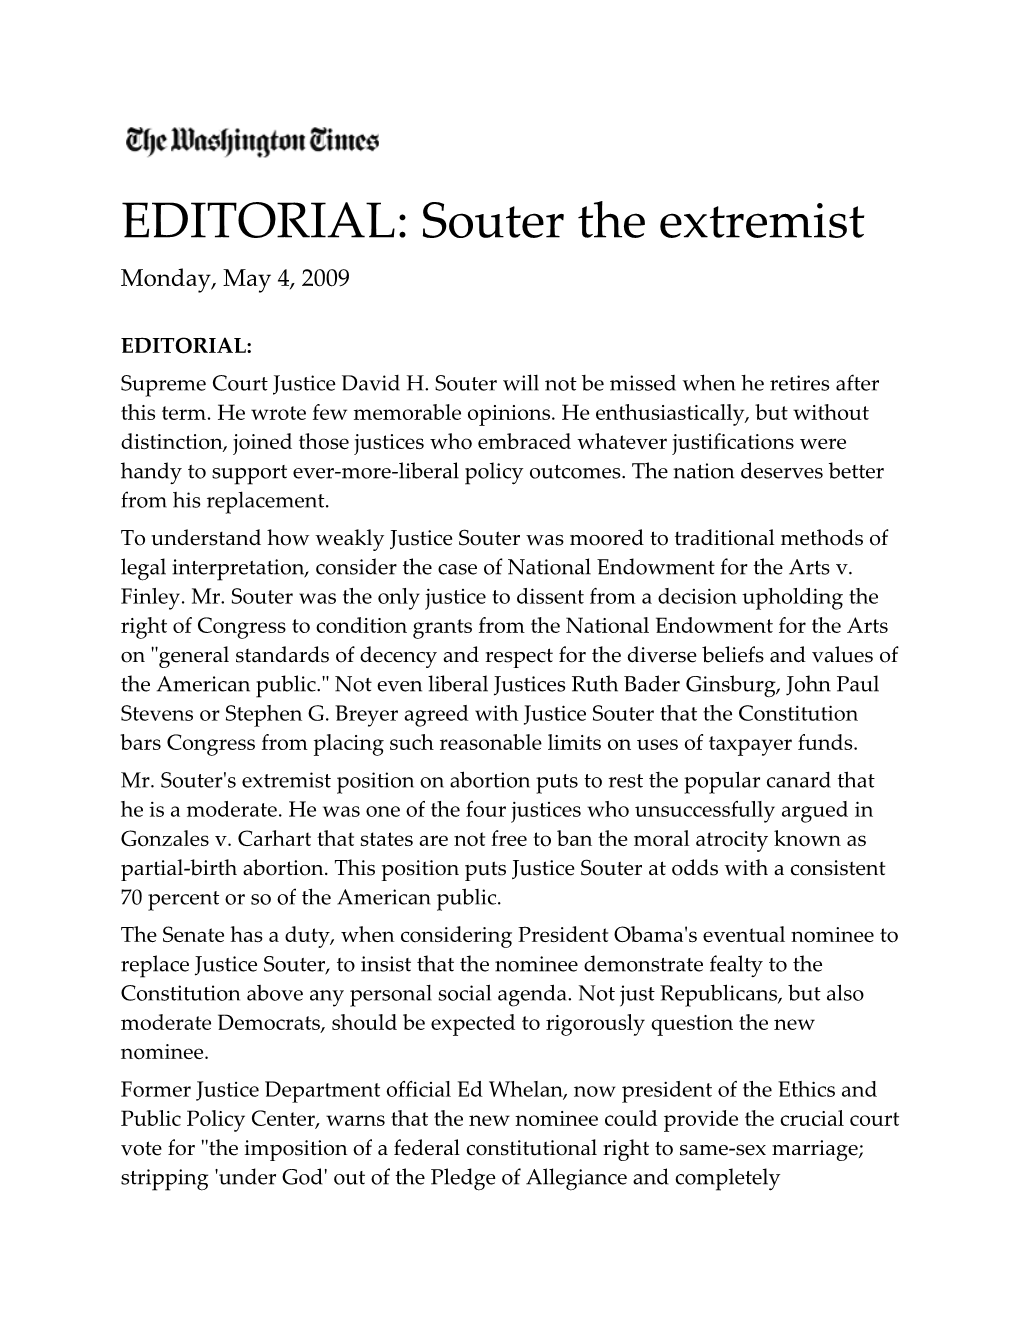 EDITORIAL: Souter the Extremist